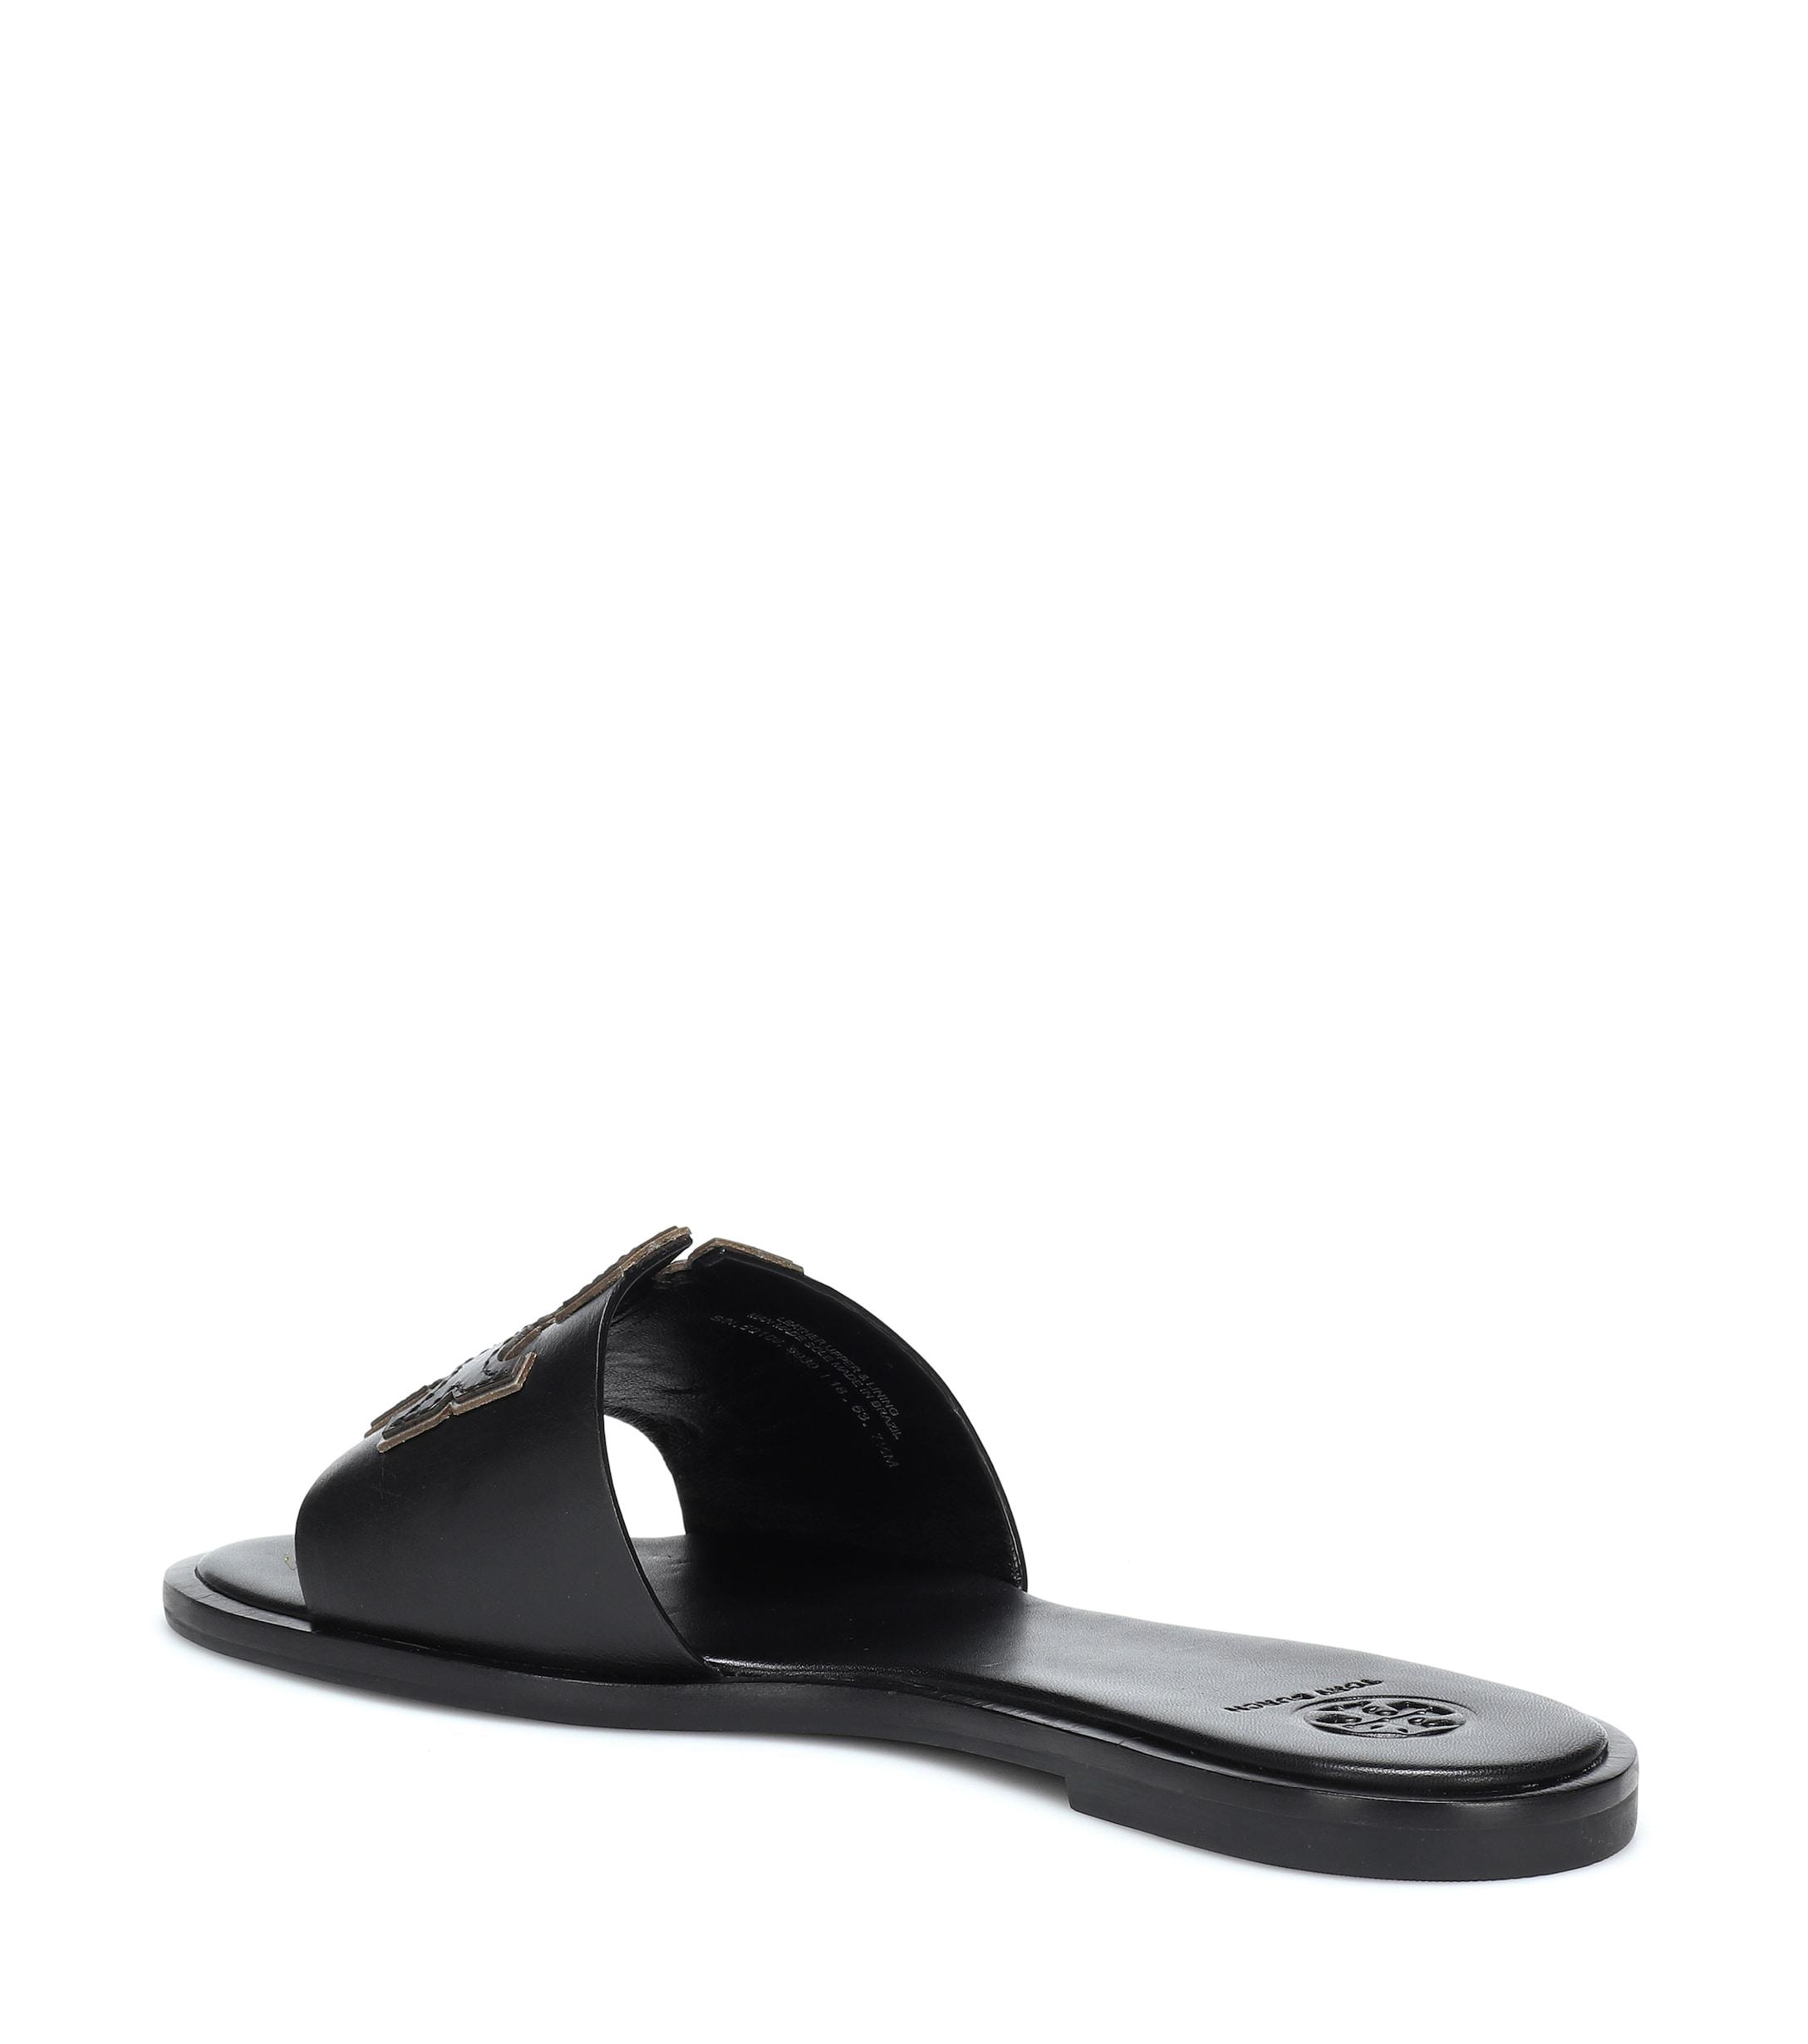 Tory Burch Ines Leather Slides in Black - Lyst